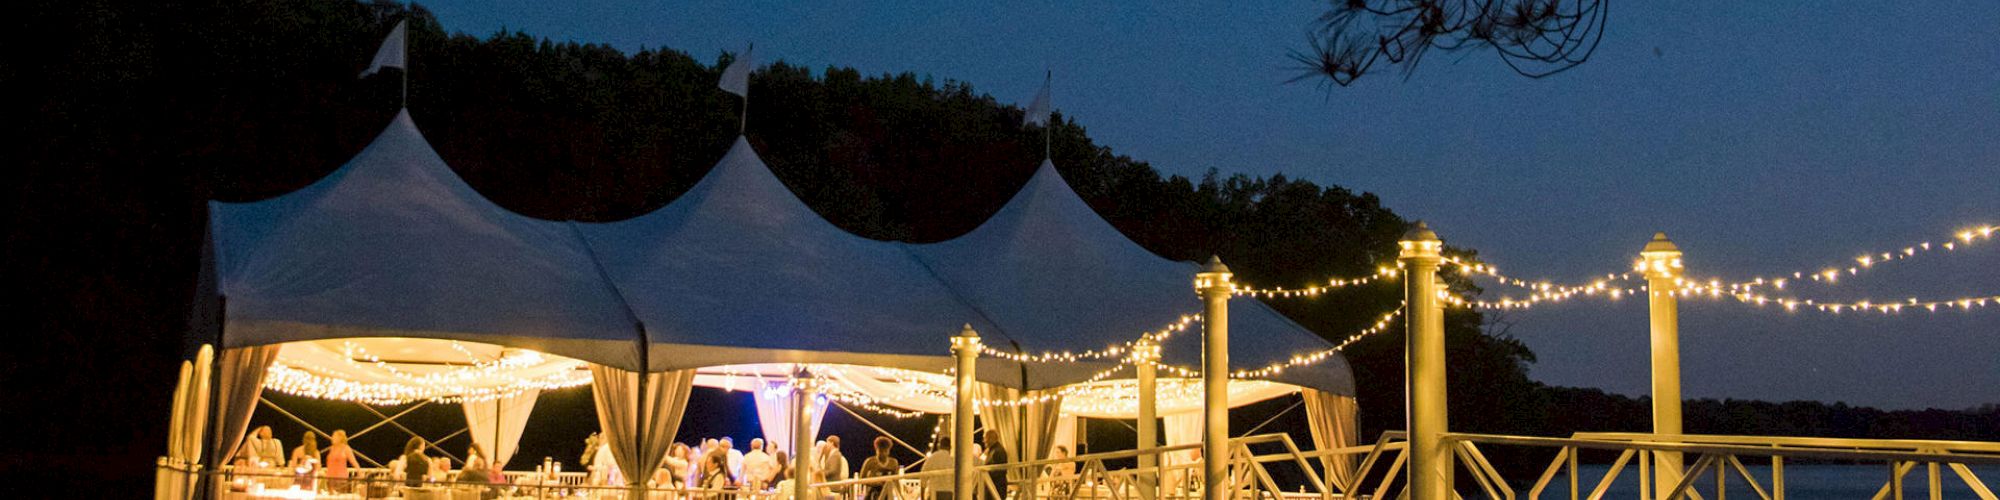 This image shows an evening event under a white tent by the water, adorned with string lights, creating a festive atmosphere.